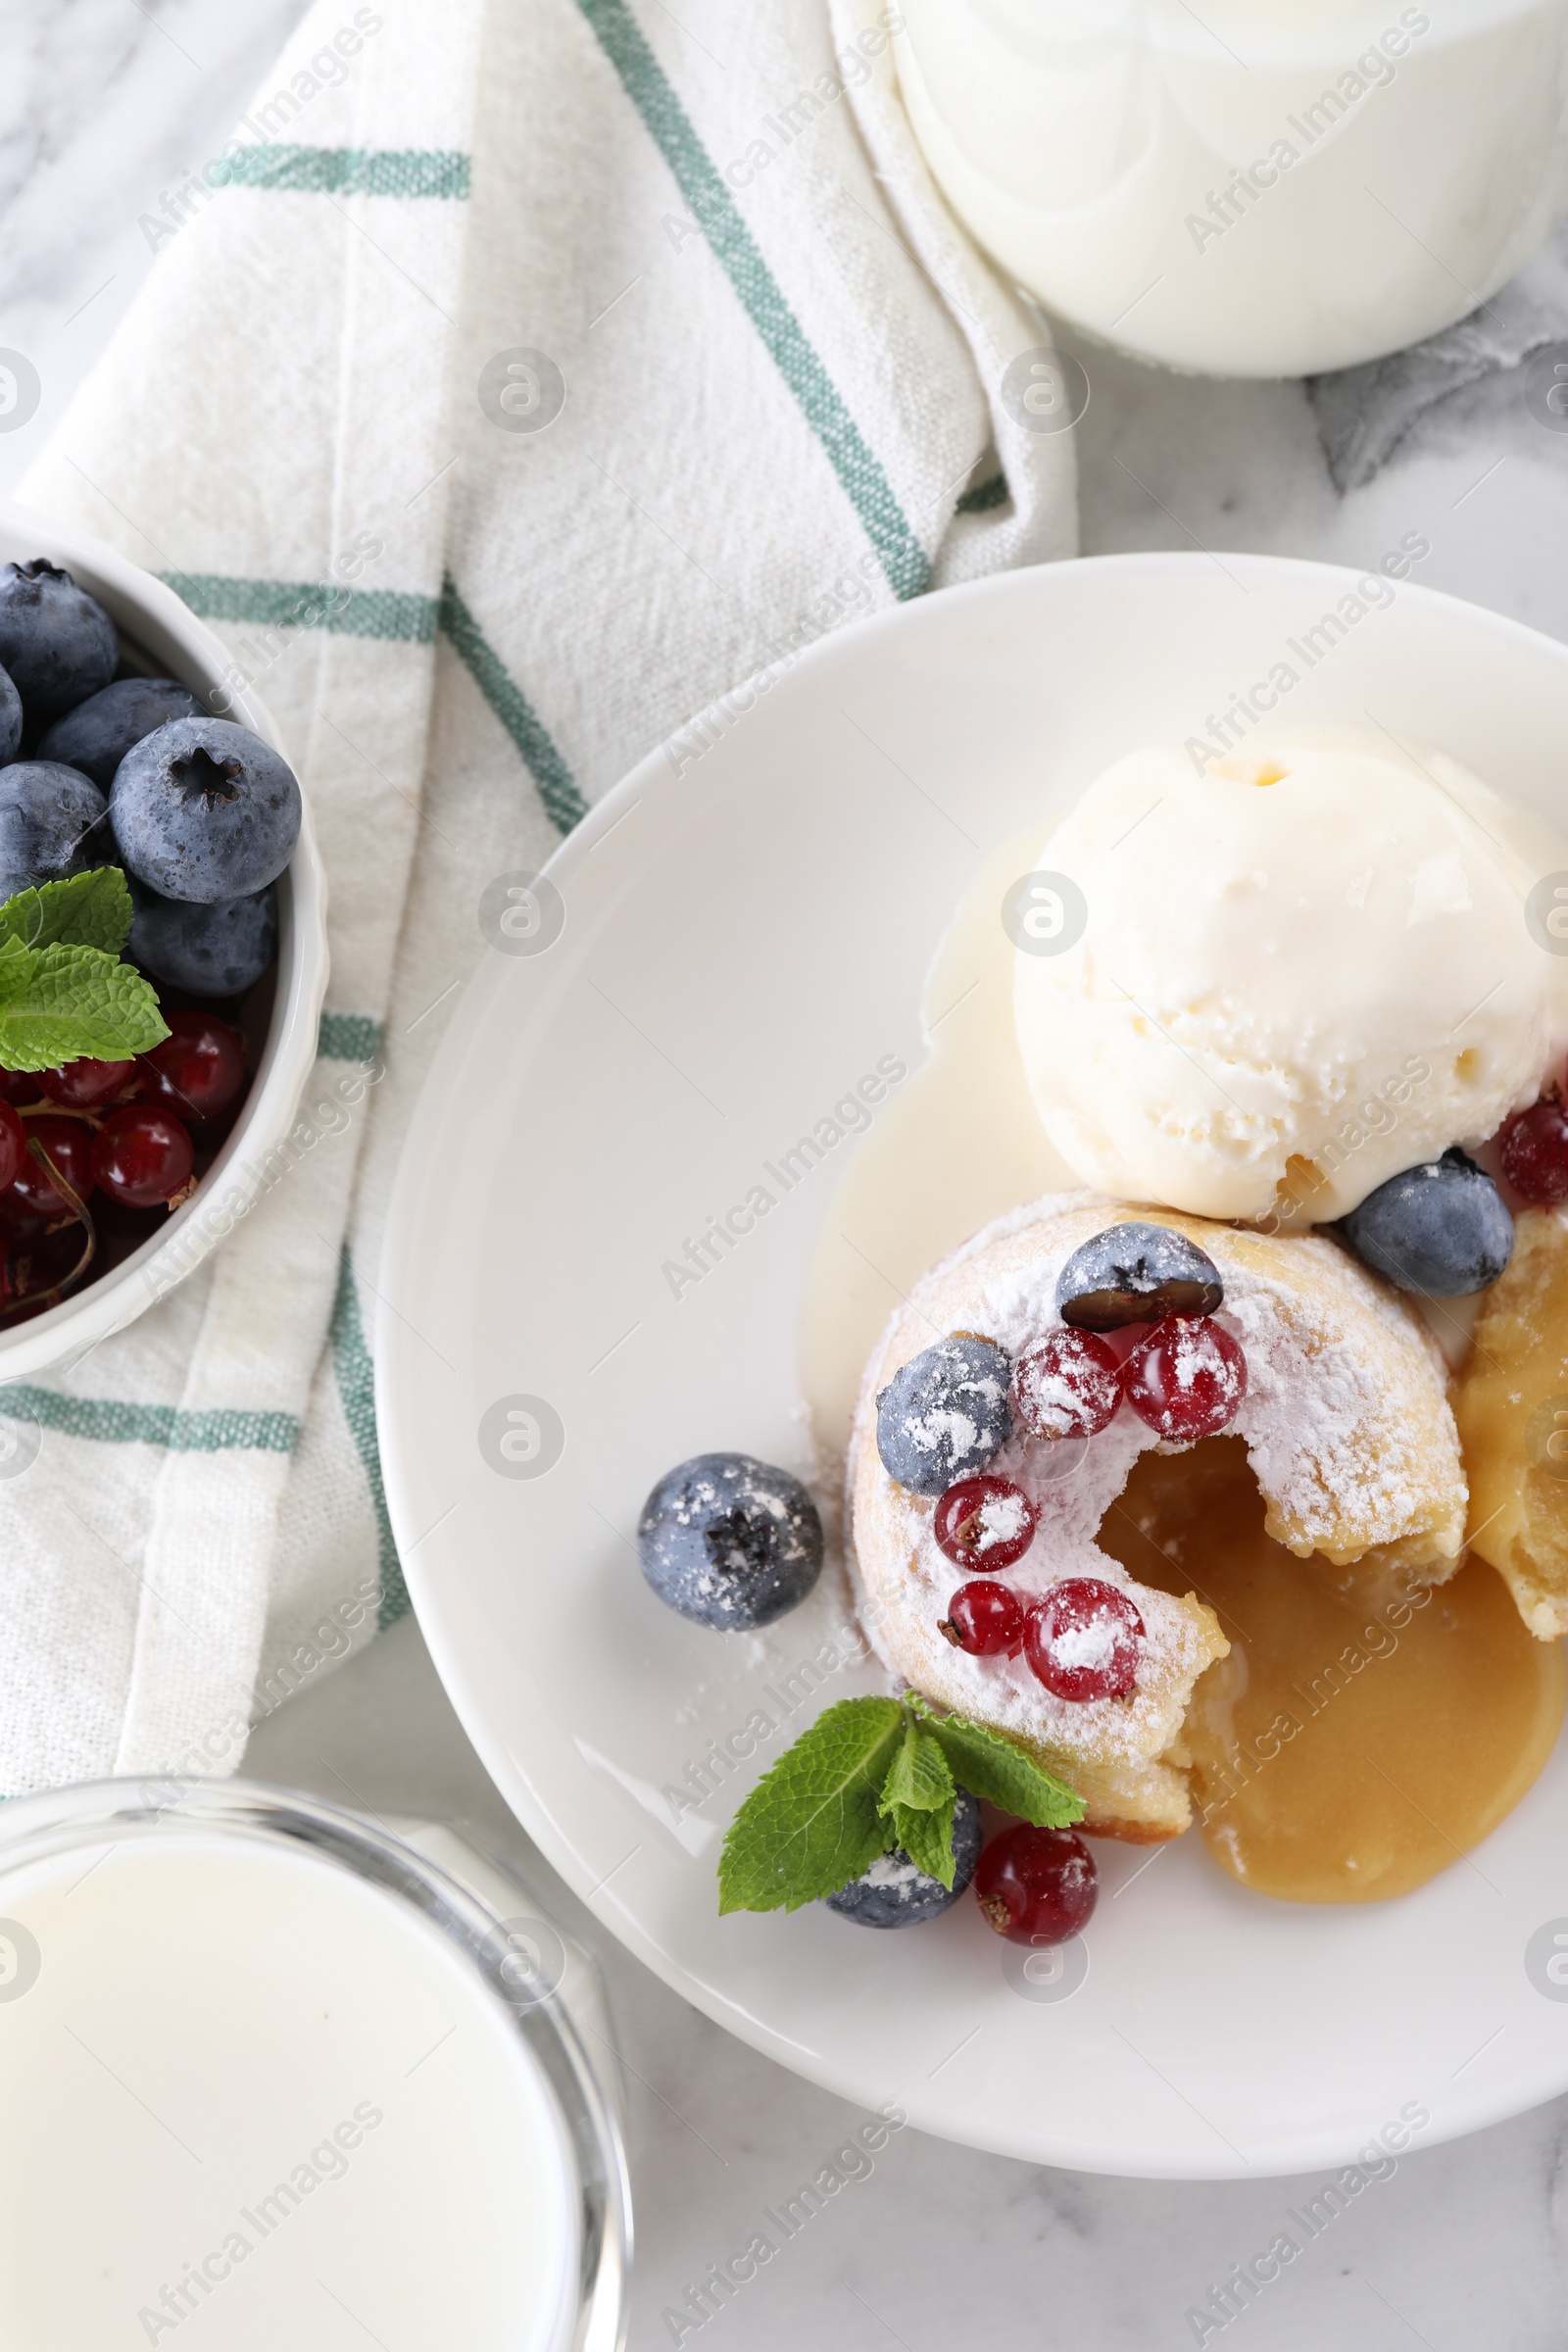 Photo of Tasty vanilla fondant with white chocolate, berries and ice cream served on white table, flat lay